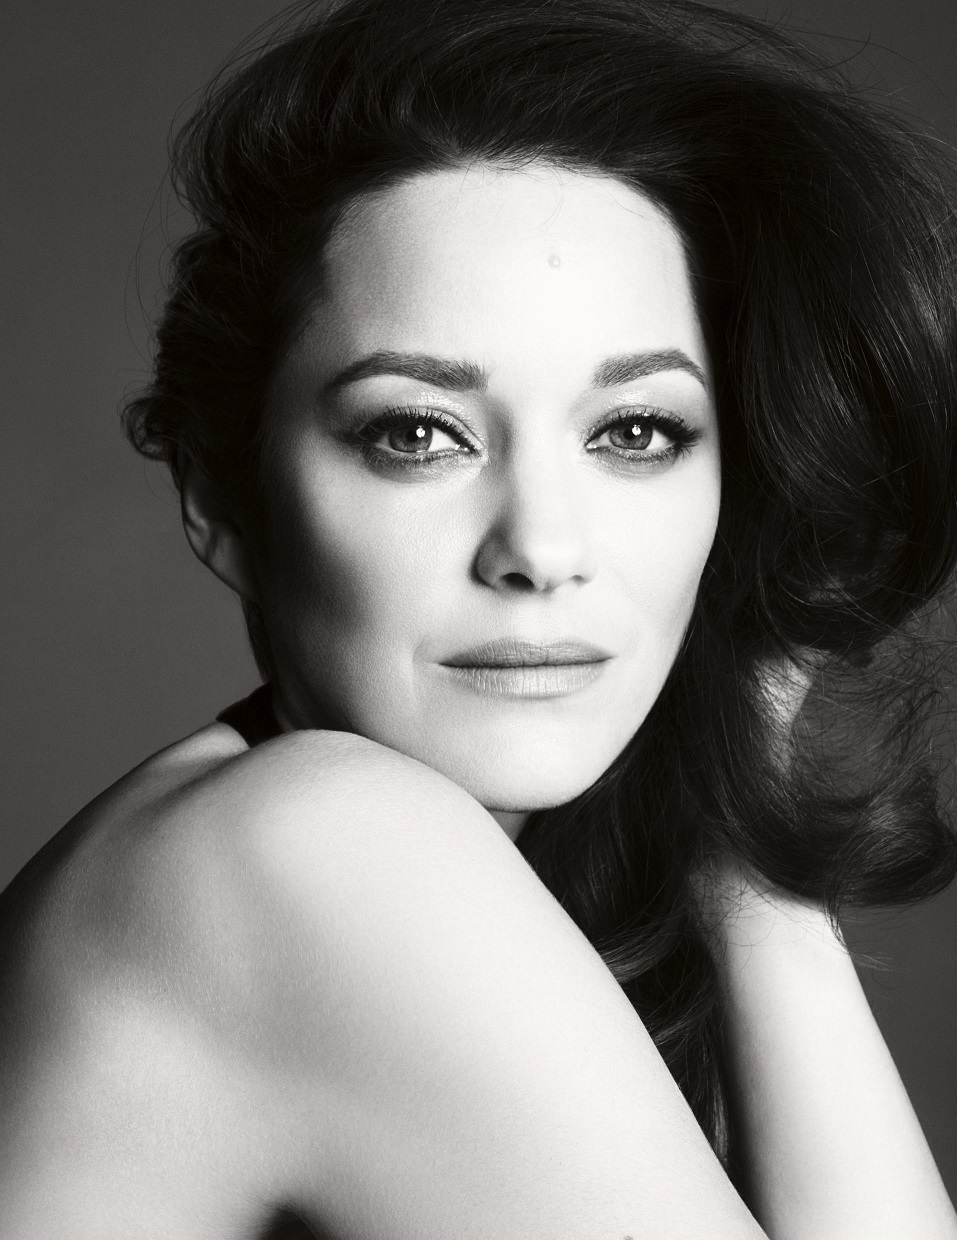 French Actress Marion Cotillard Is The New Face For Chanel No 5